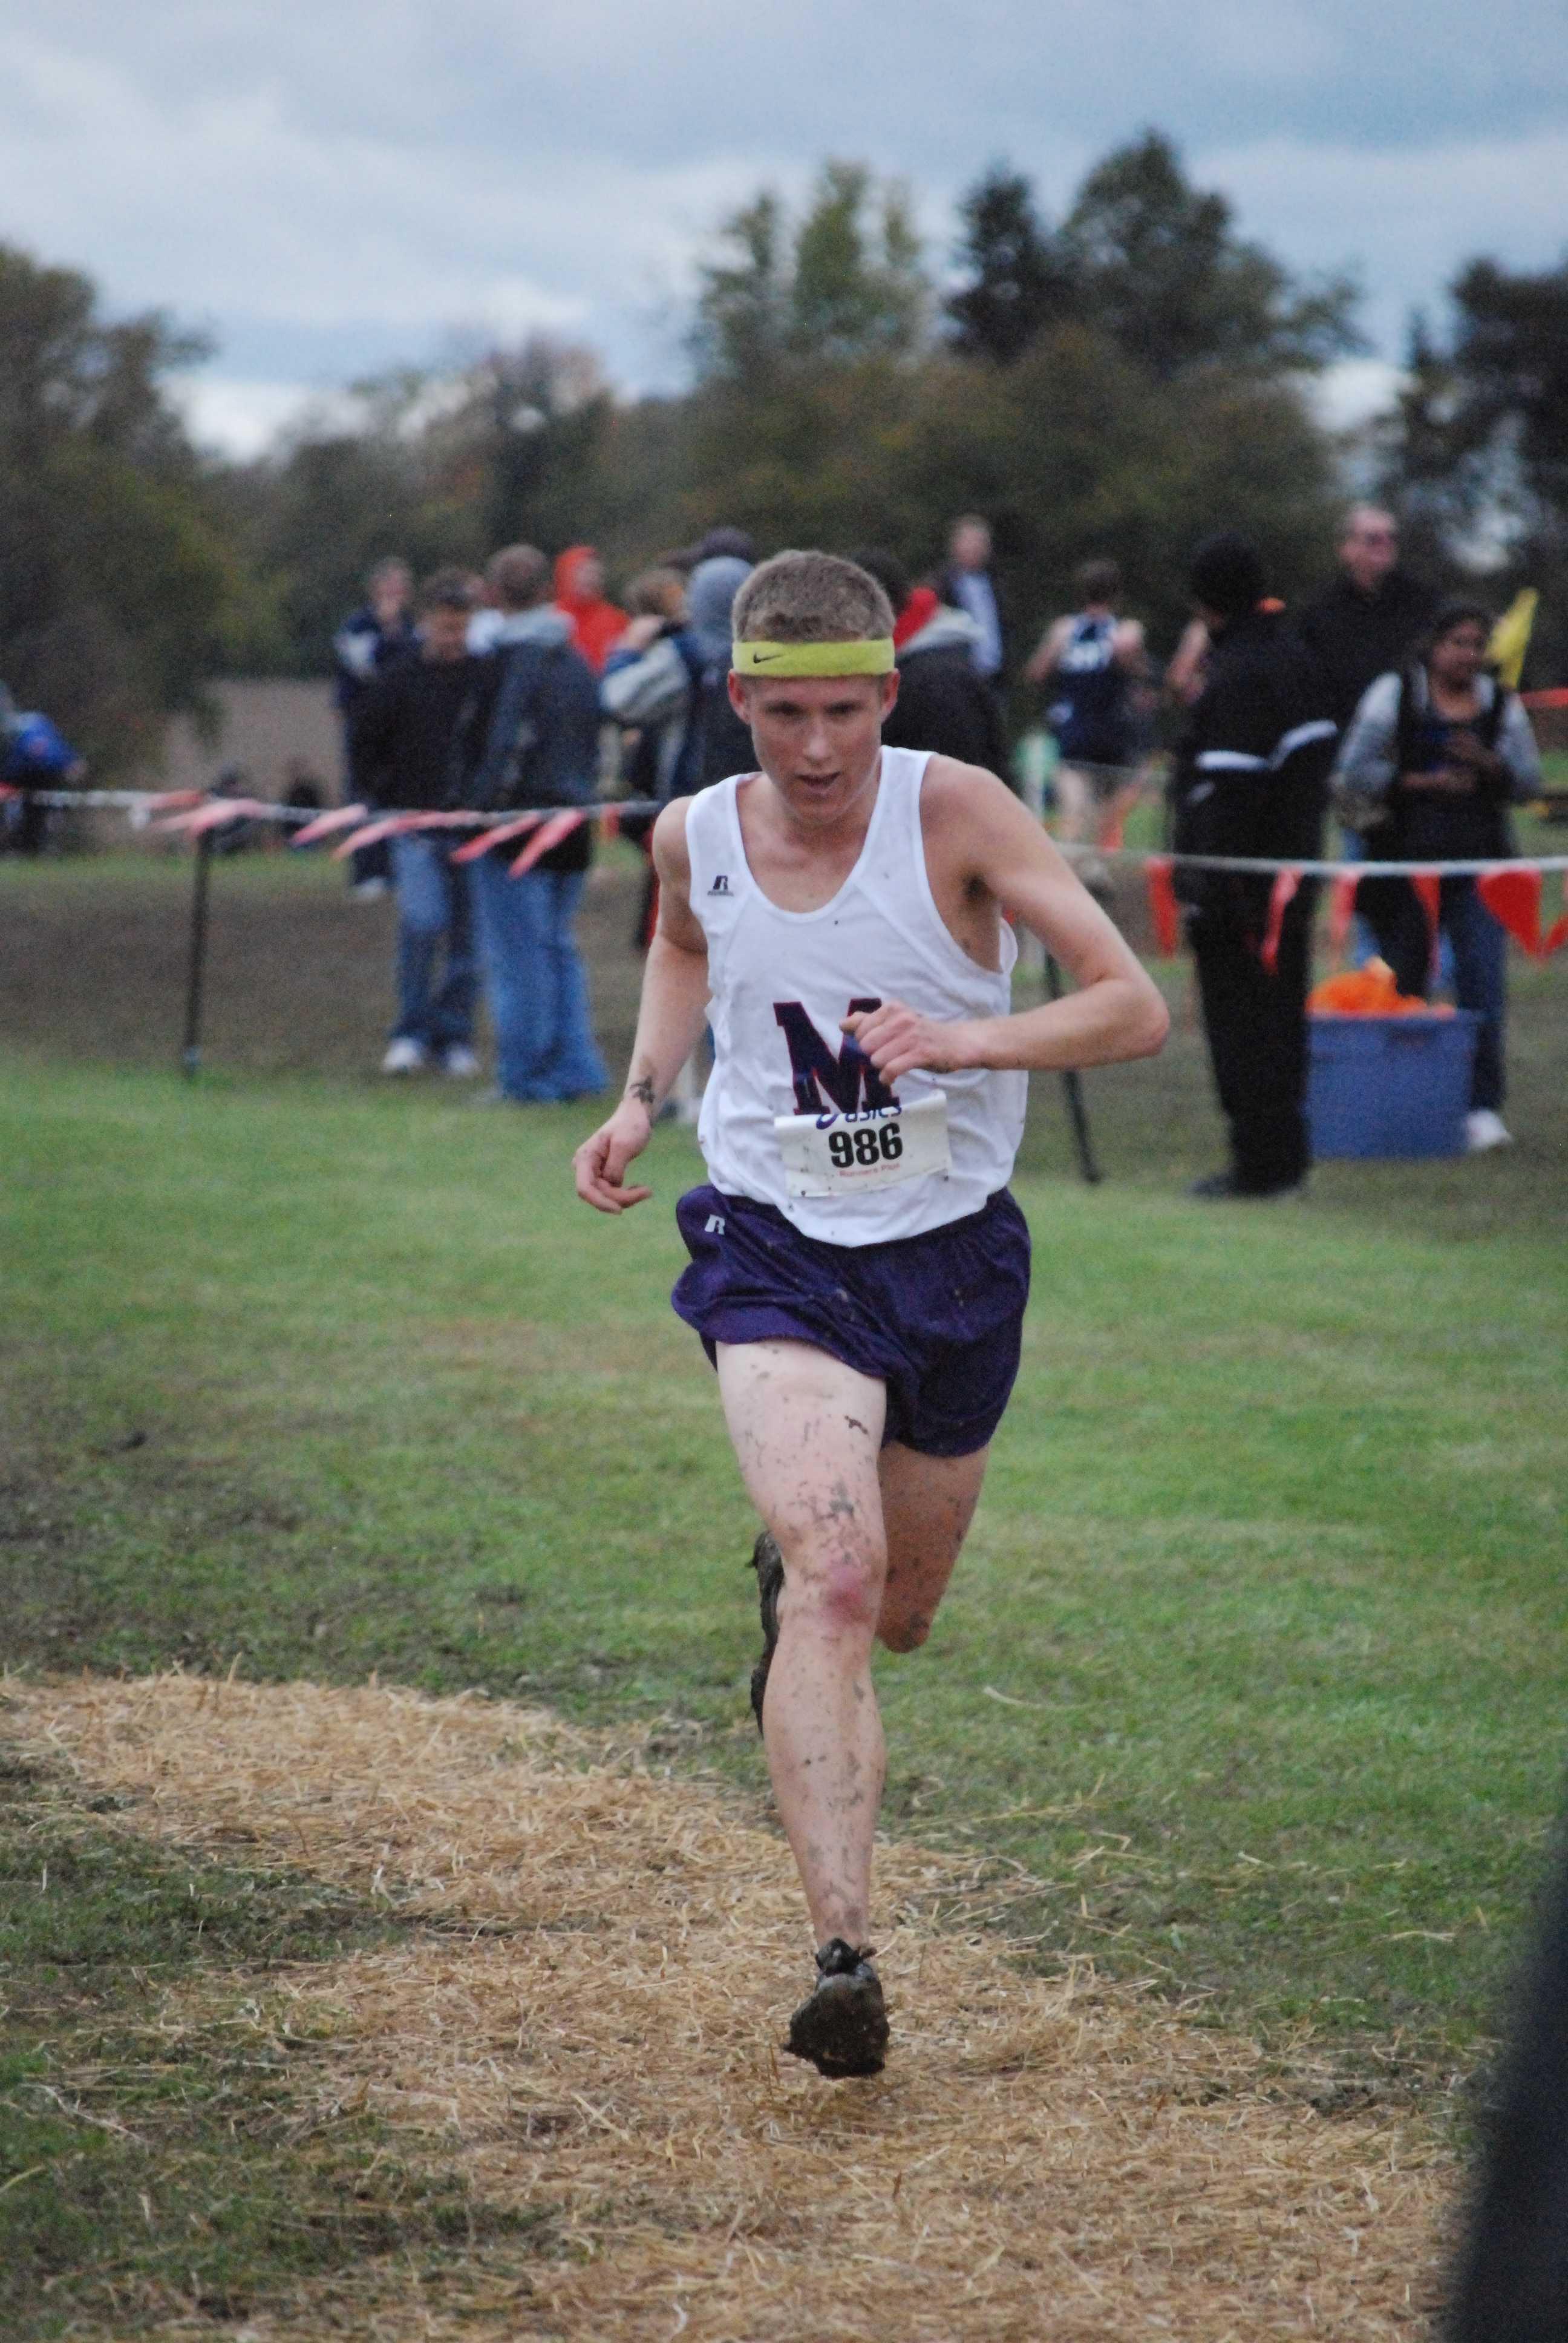 Middletown senior Will Parsons placed ninth overall at Saturday's Division I district cross country meet. to qualify for next week's regional meet in Troy.